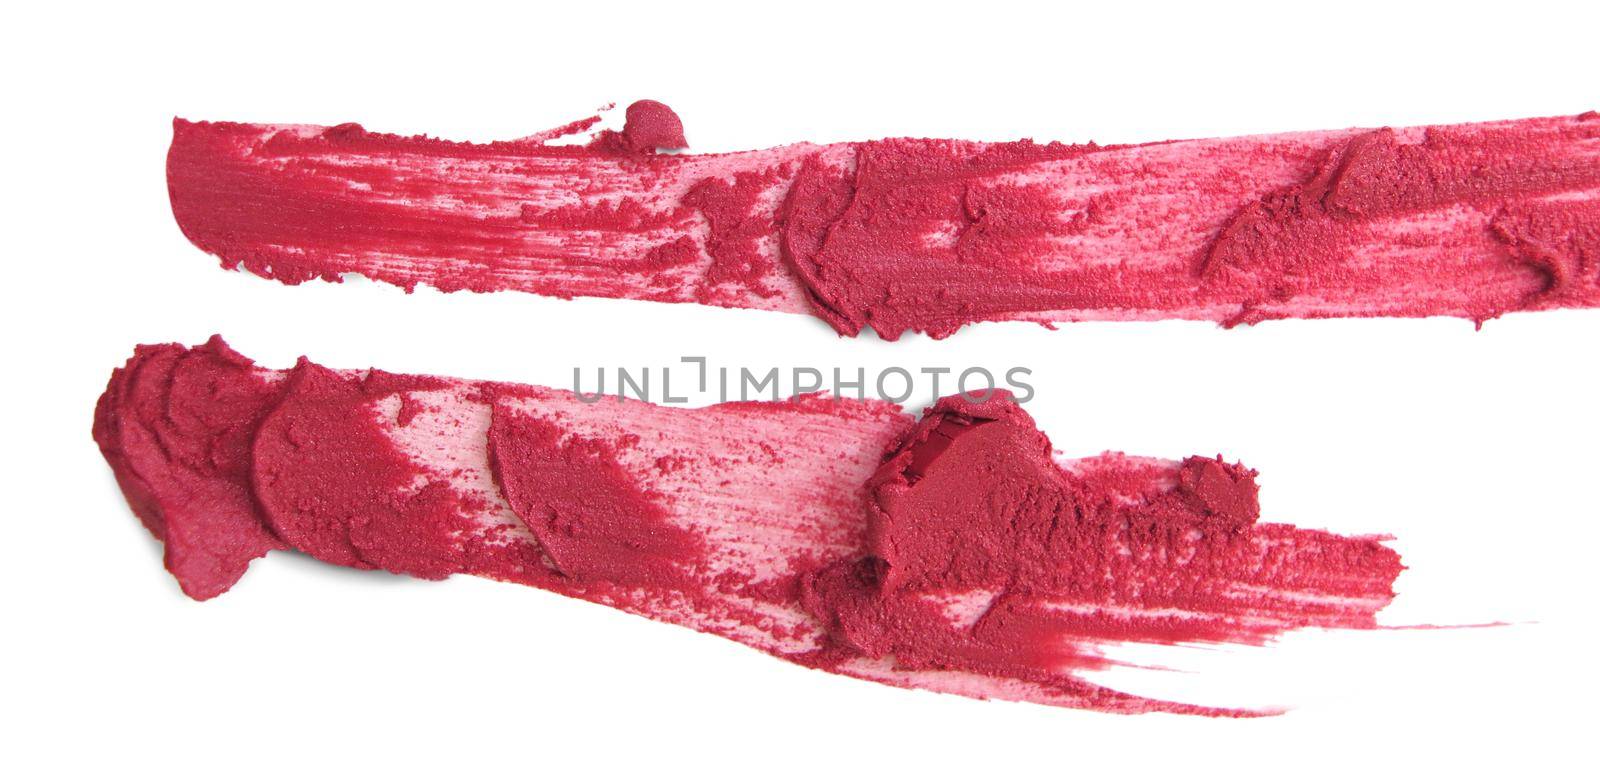 Smudged lipstick on white background by aroas